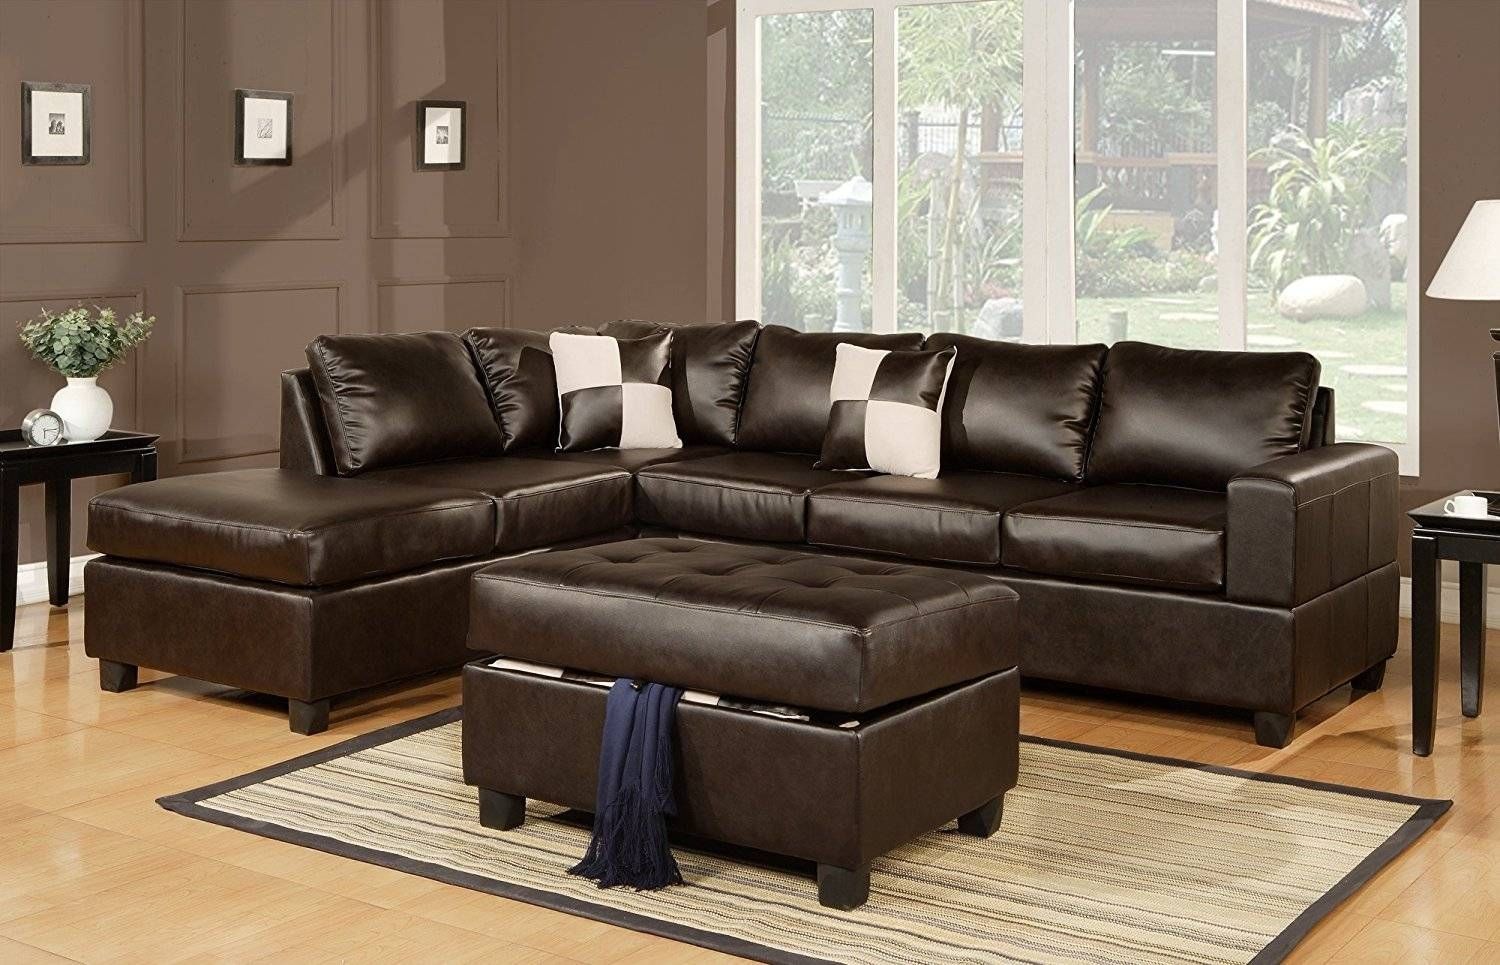 ▻ Furniture : 10 Leather Sectional Sofas With Recliners And In 10 Piece Sectional Sofa (View 7 of 30)